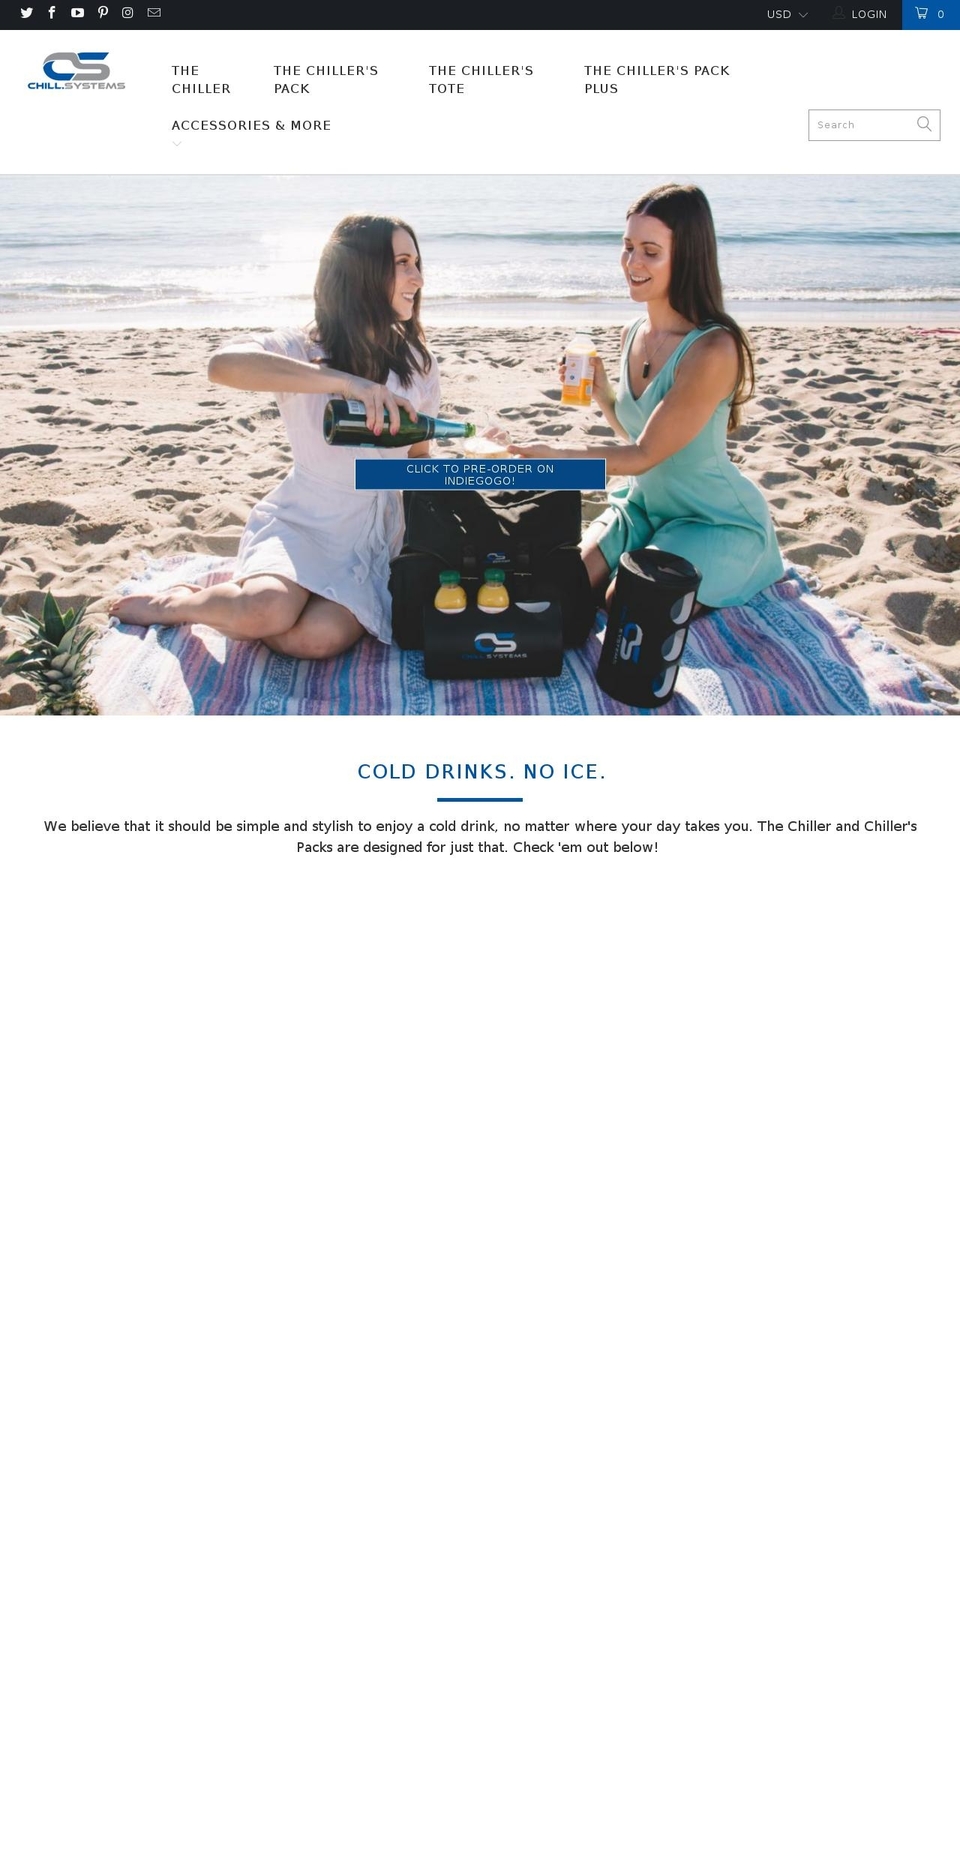 chill.systems shopify website screenshot